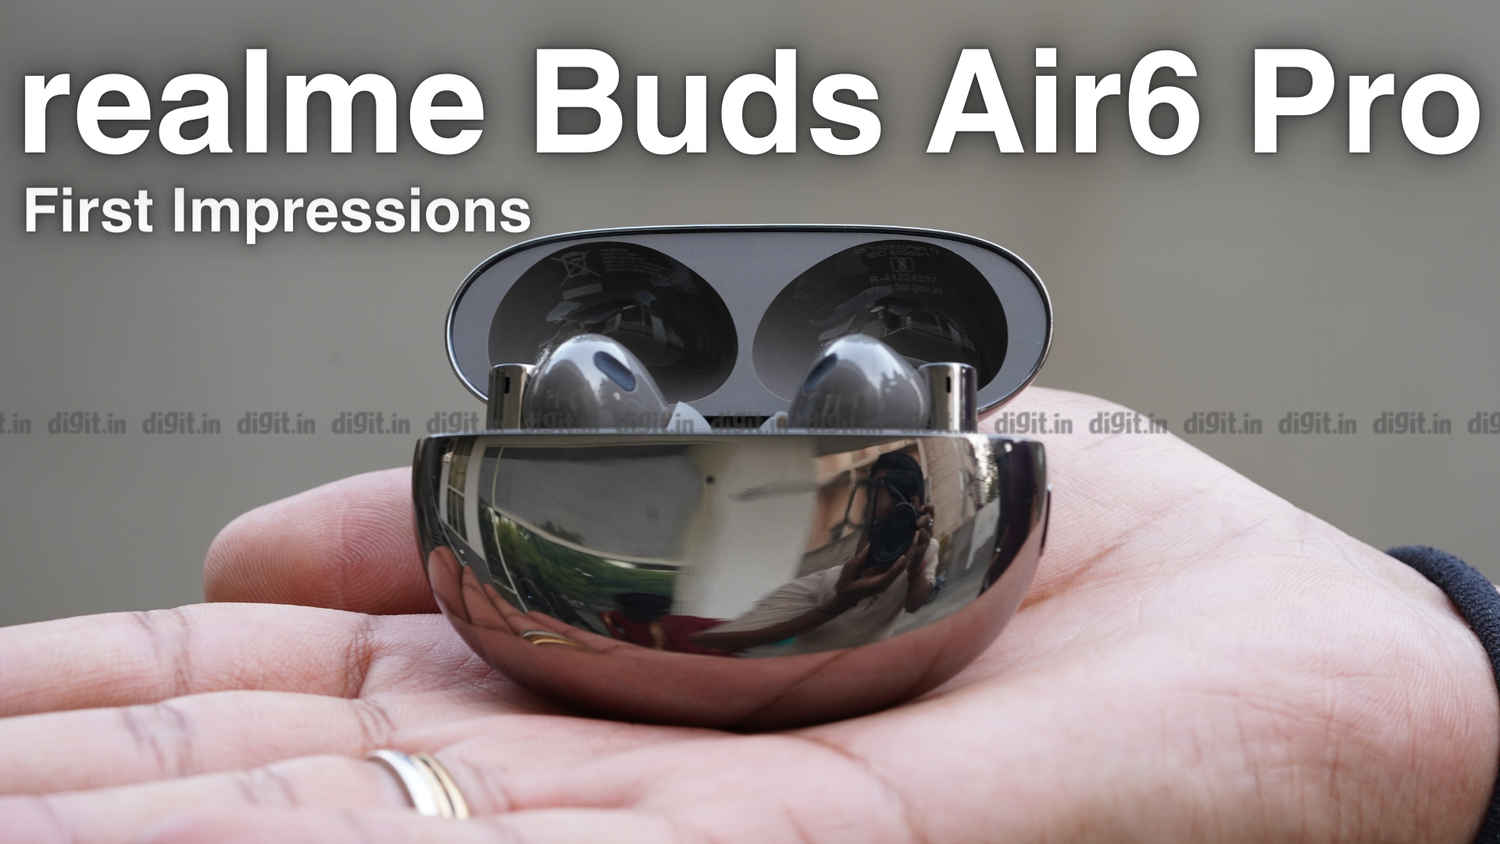 realme Buds Air6 Pro launched: What I found out in the first 24 hours of using them